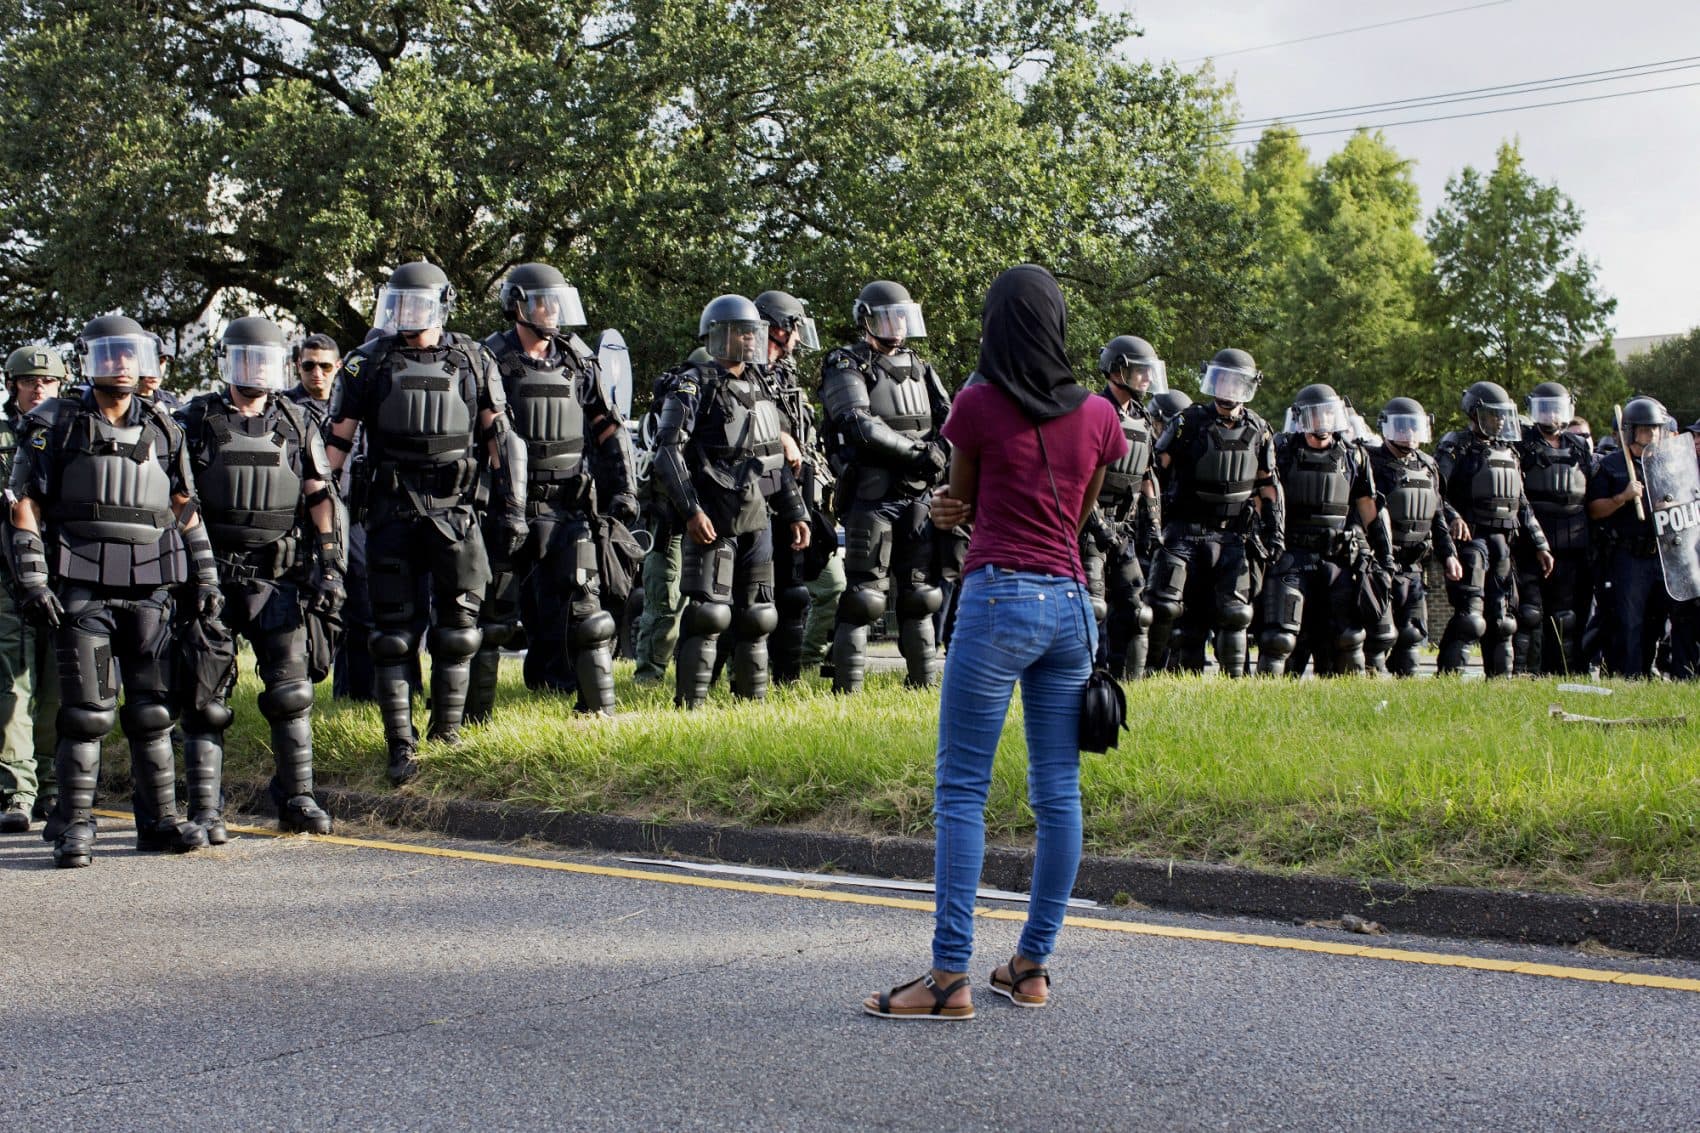 A protester watches as police in riot gear clear the street of protesters in front of the Baton Rouge Police Department headquarters in Baton Rouge, La., Saturday, July 9, 2016. (Max Becherer/AP)